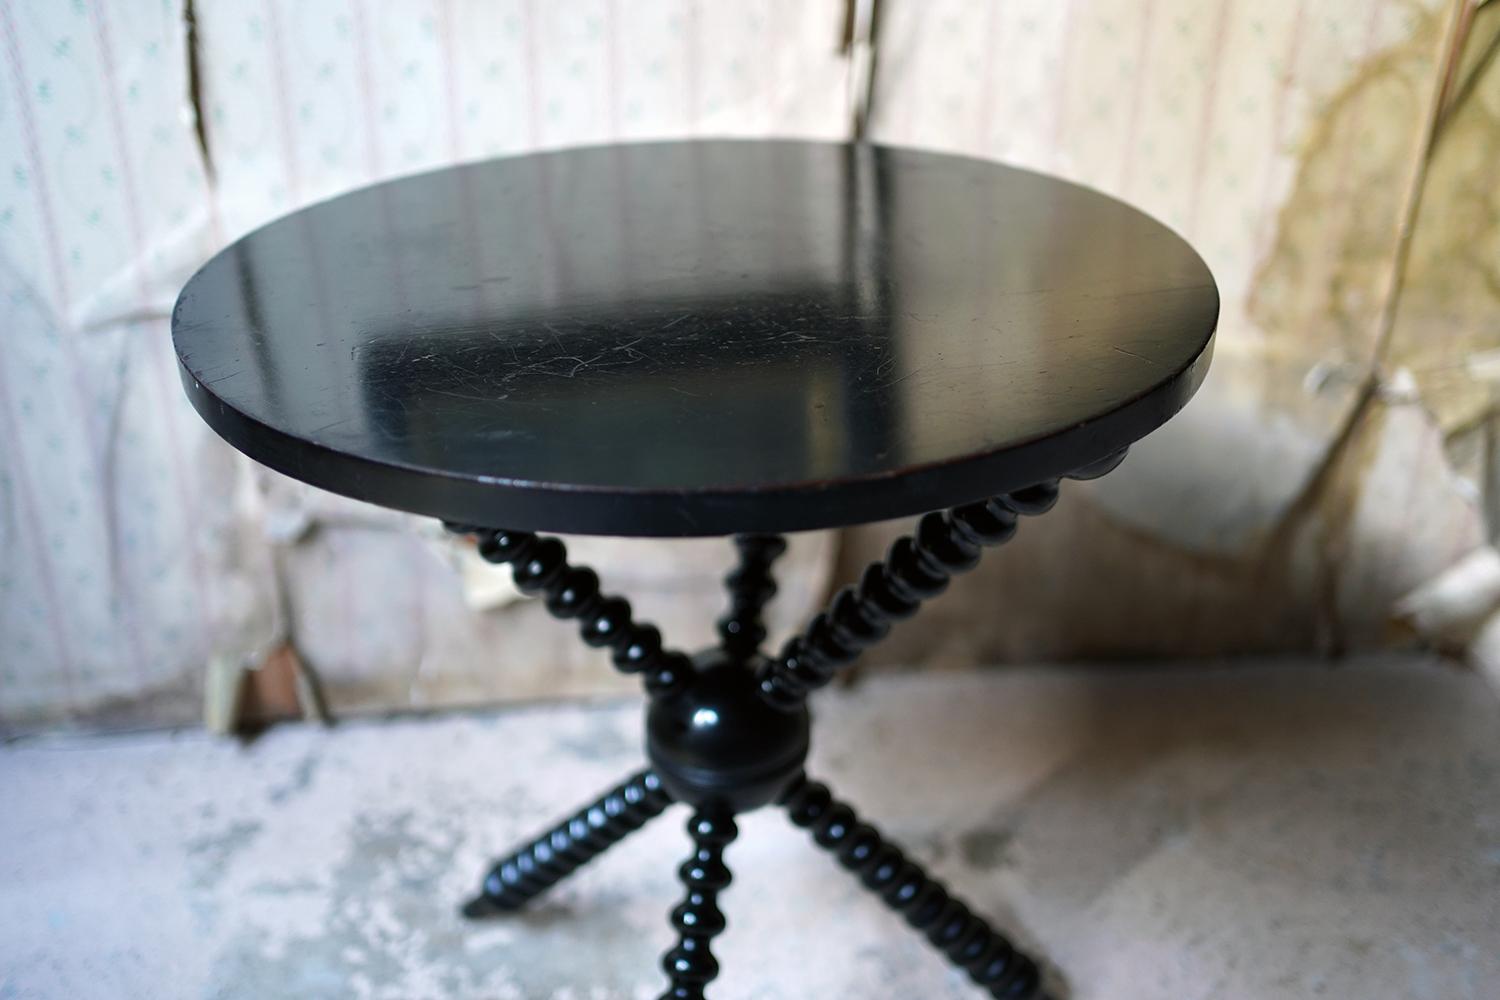 The super quality ebonized bobbin side or gypsy table, stamped under for Wylie & Lochhead Glasgow and the number 76318, having a beautifully turned bobbin tripod base to central orb and circular top and surviving from late 19th century,